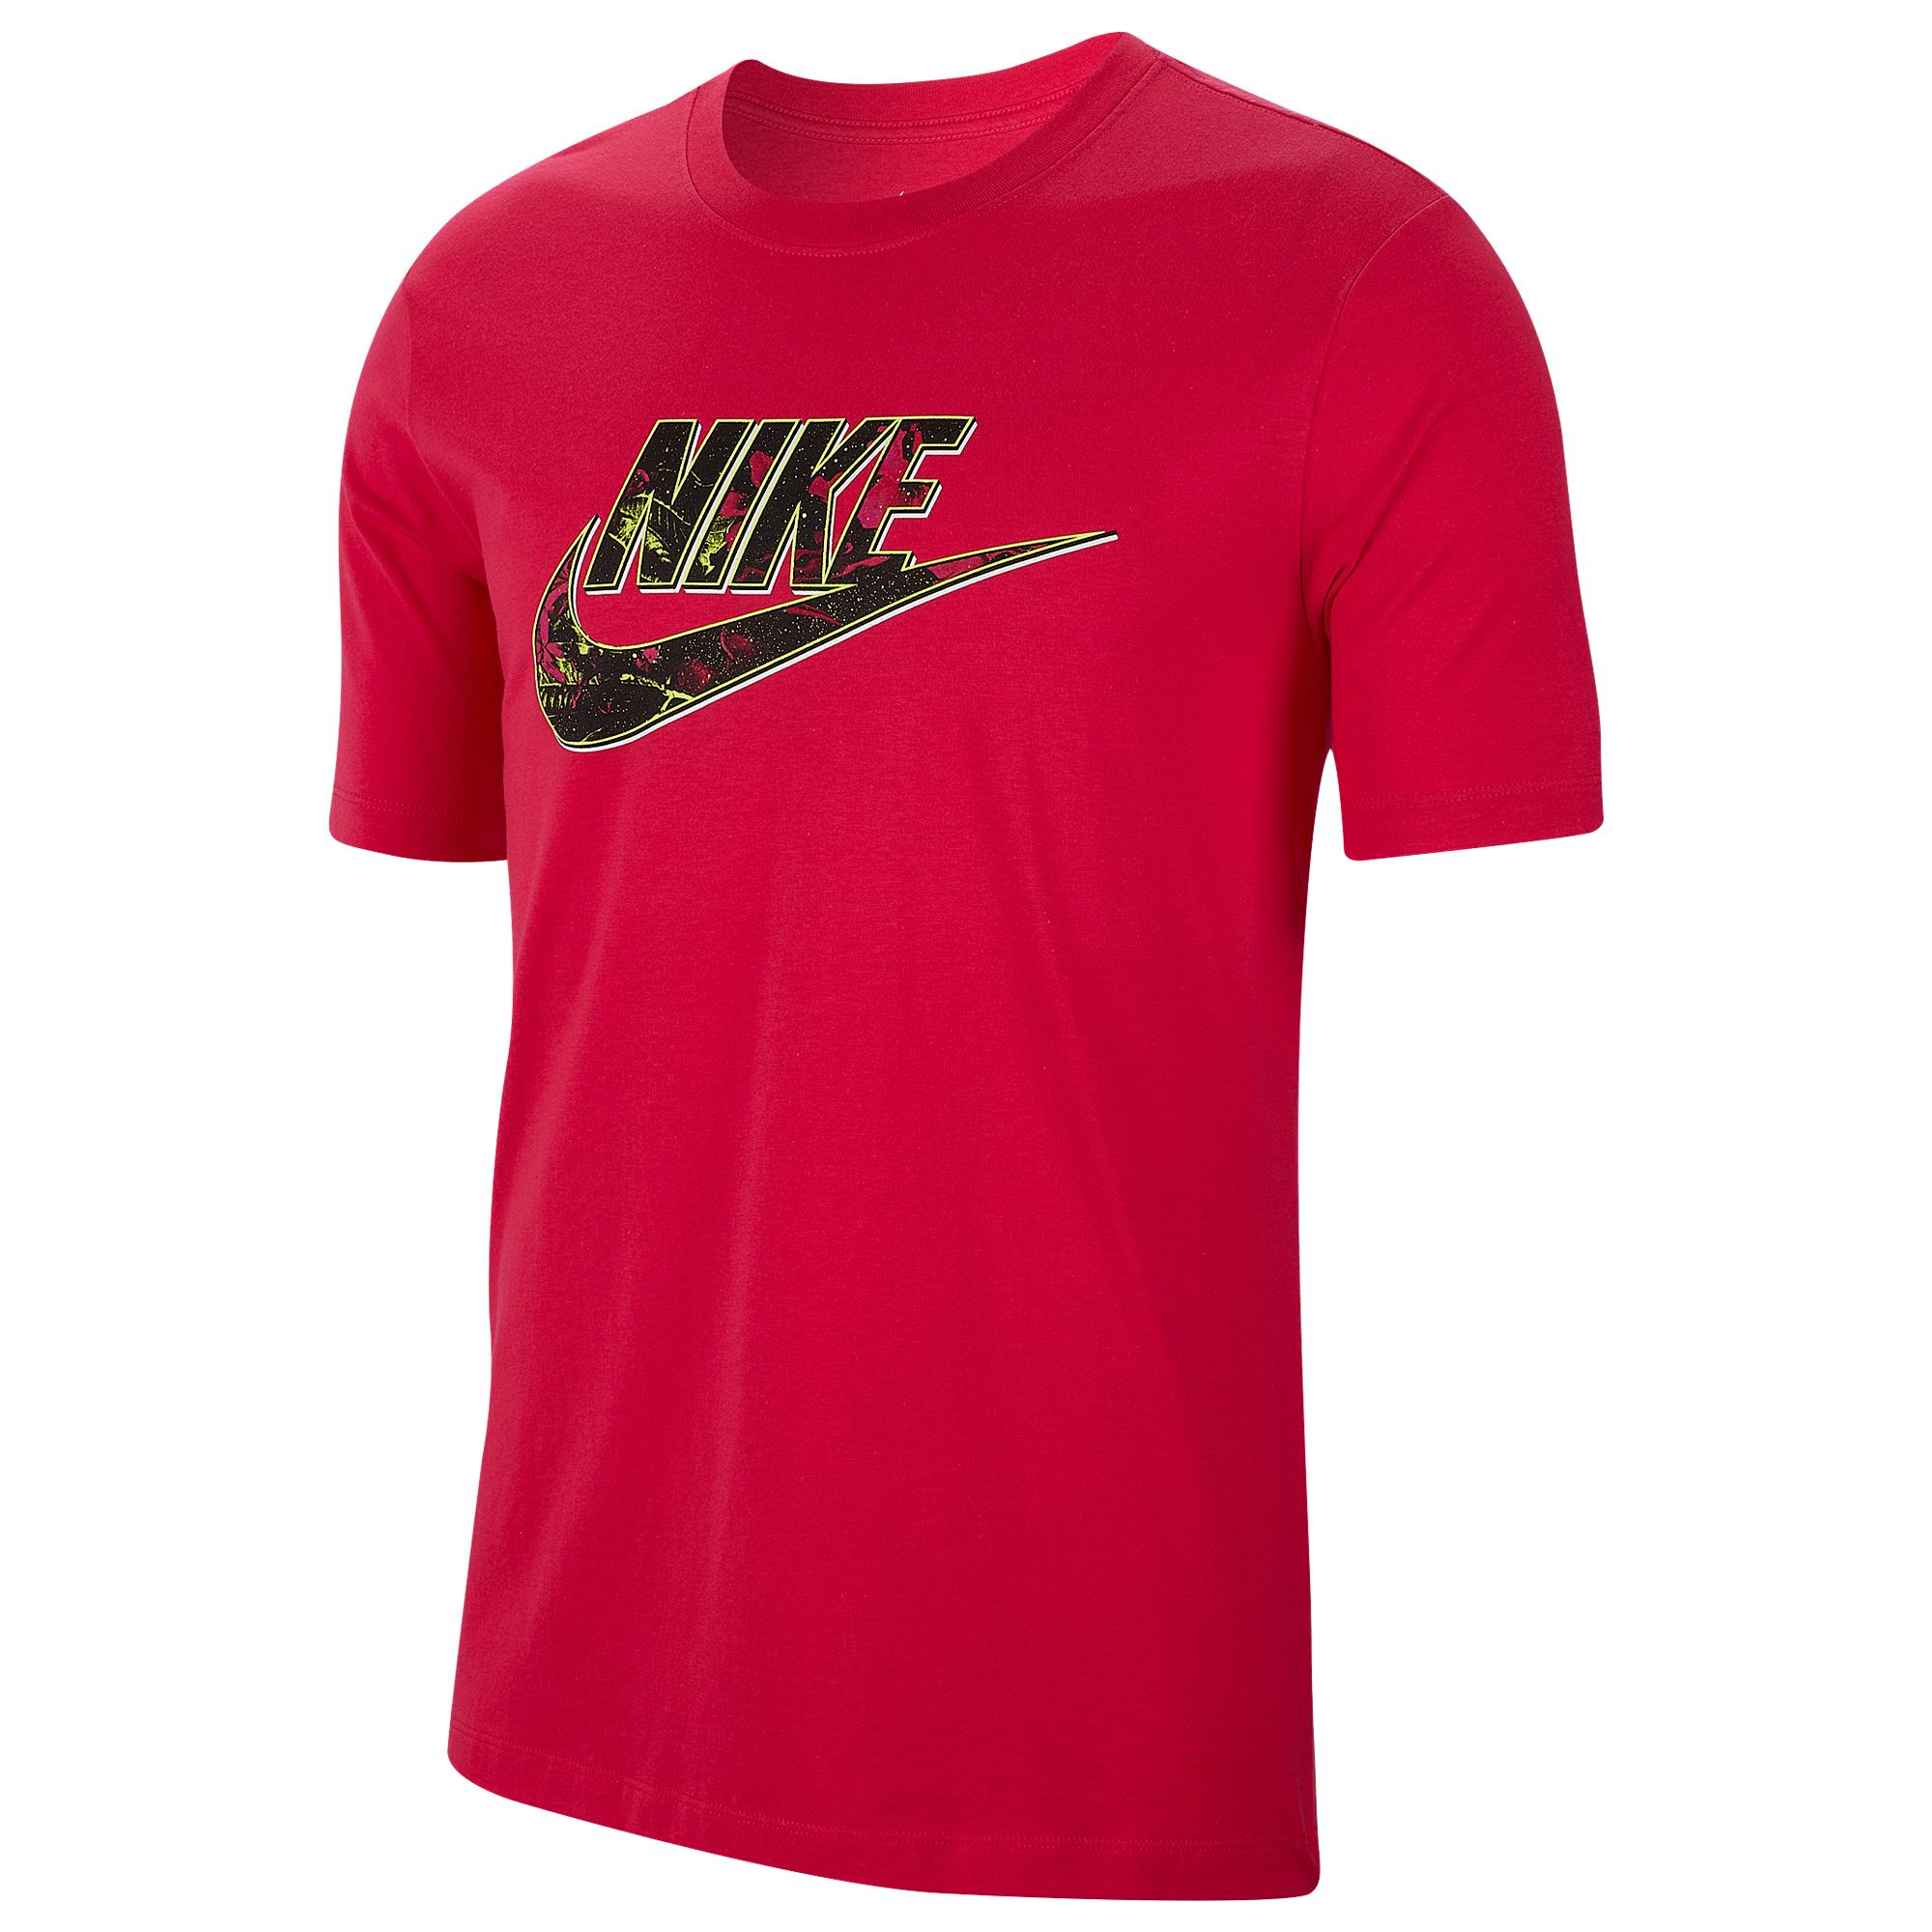 Nike Pink Limeade Futura T-shirt in Pink for Men - Lyst